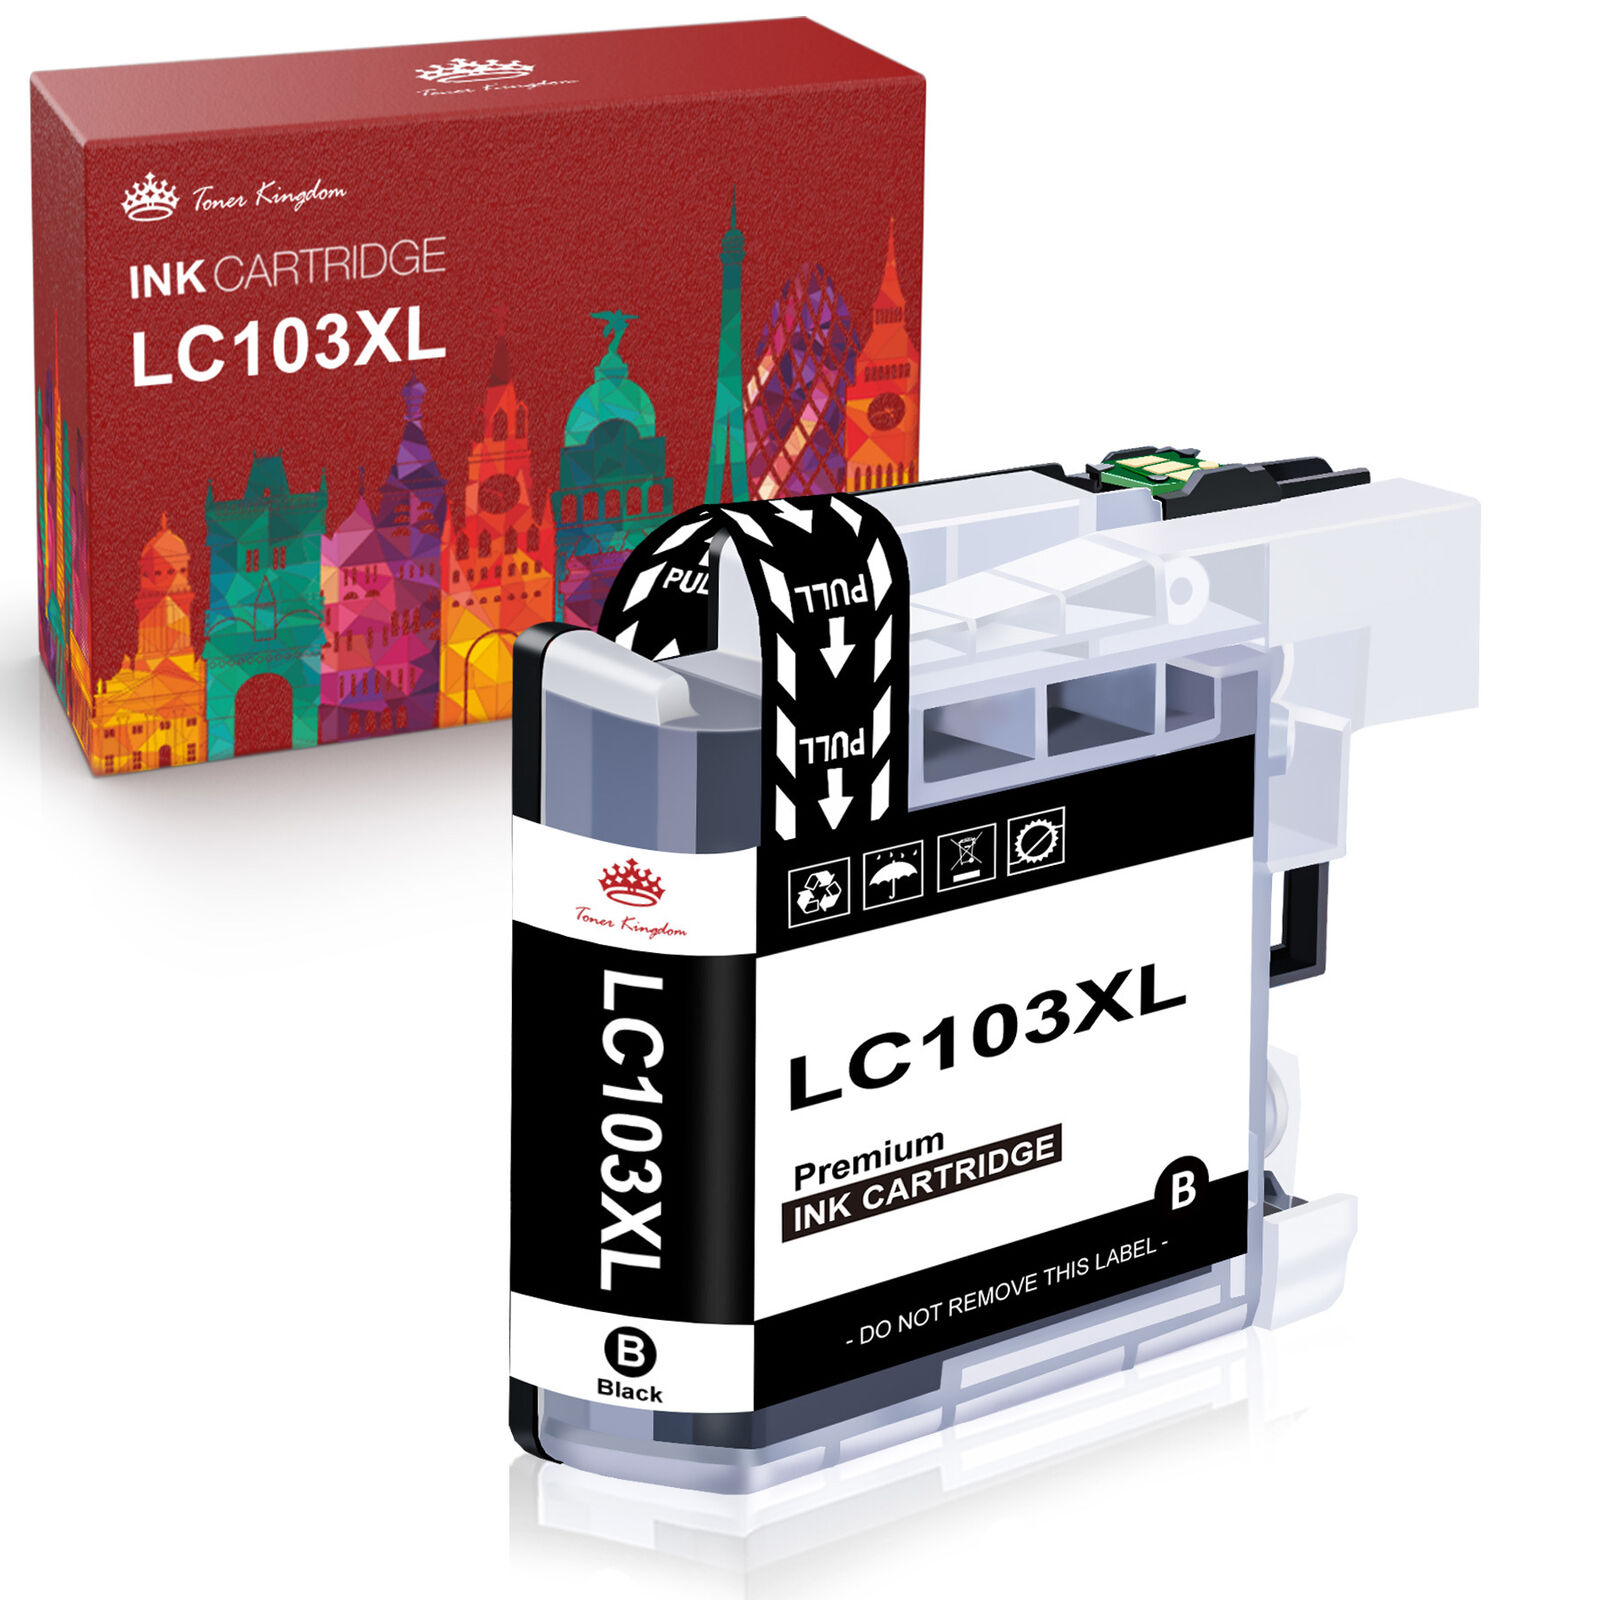 LC103 XL LC101 Ink Cartridge for Brother MFC-J870DW MFC-J470DW MFC-J475DW lot